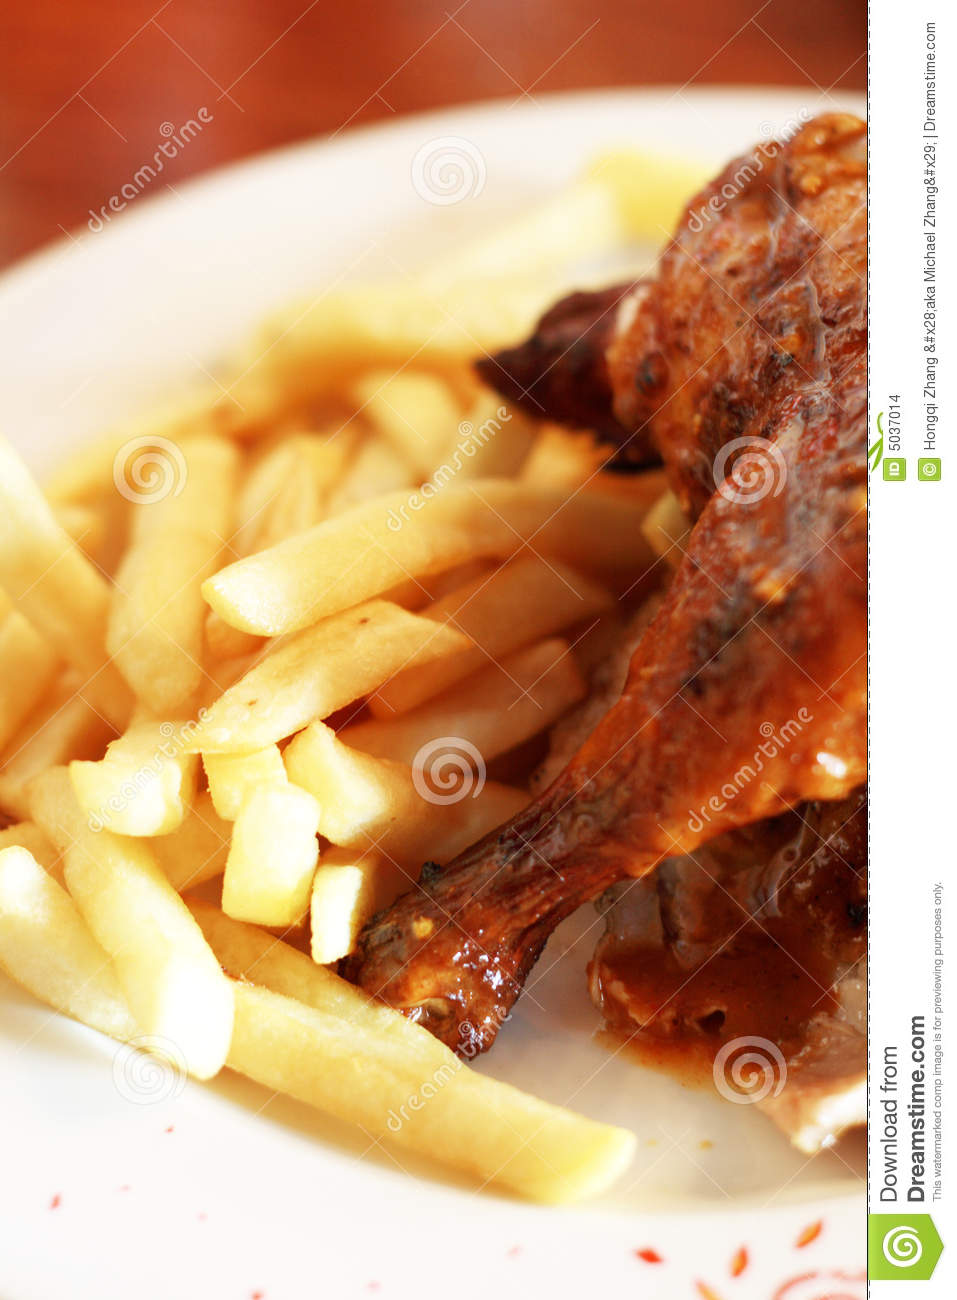 Half Grilled Chicken And Some Deep Fried Chips On A Plate